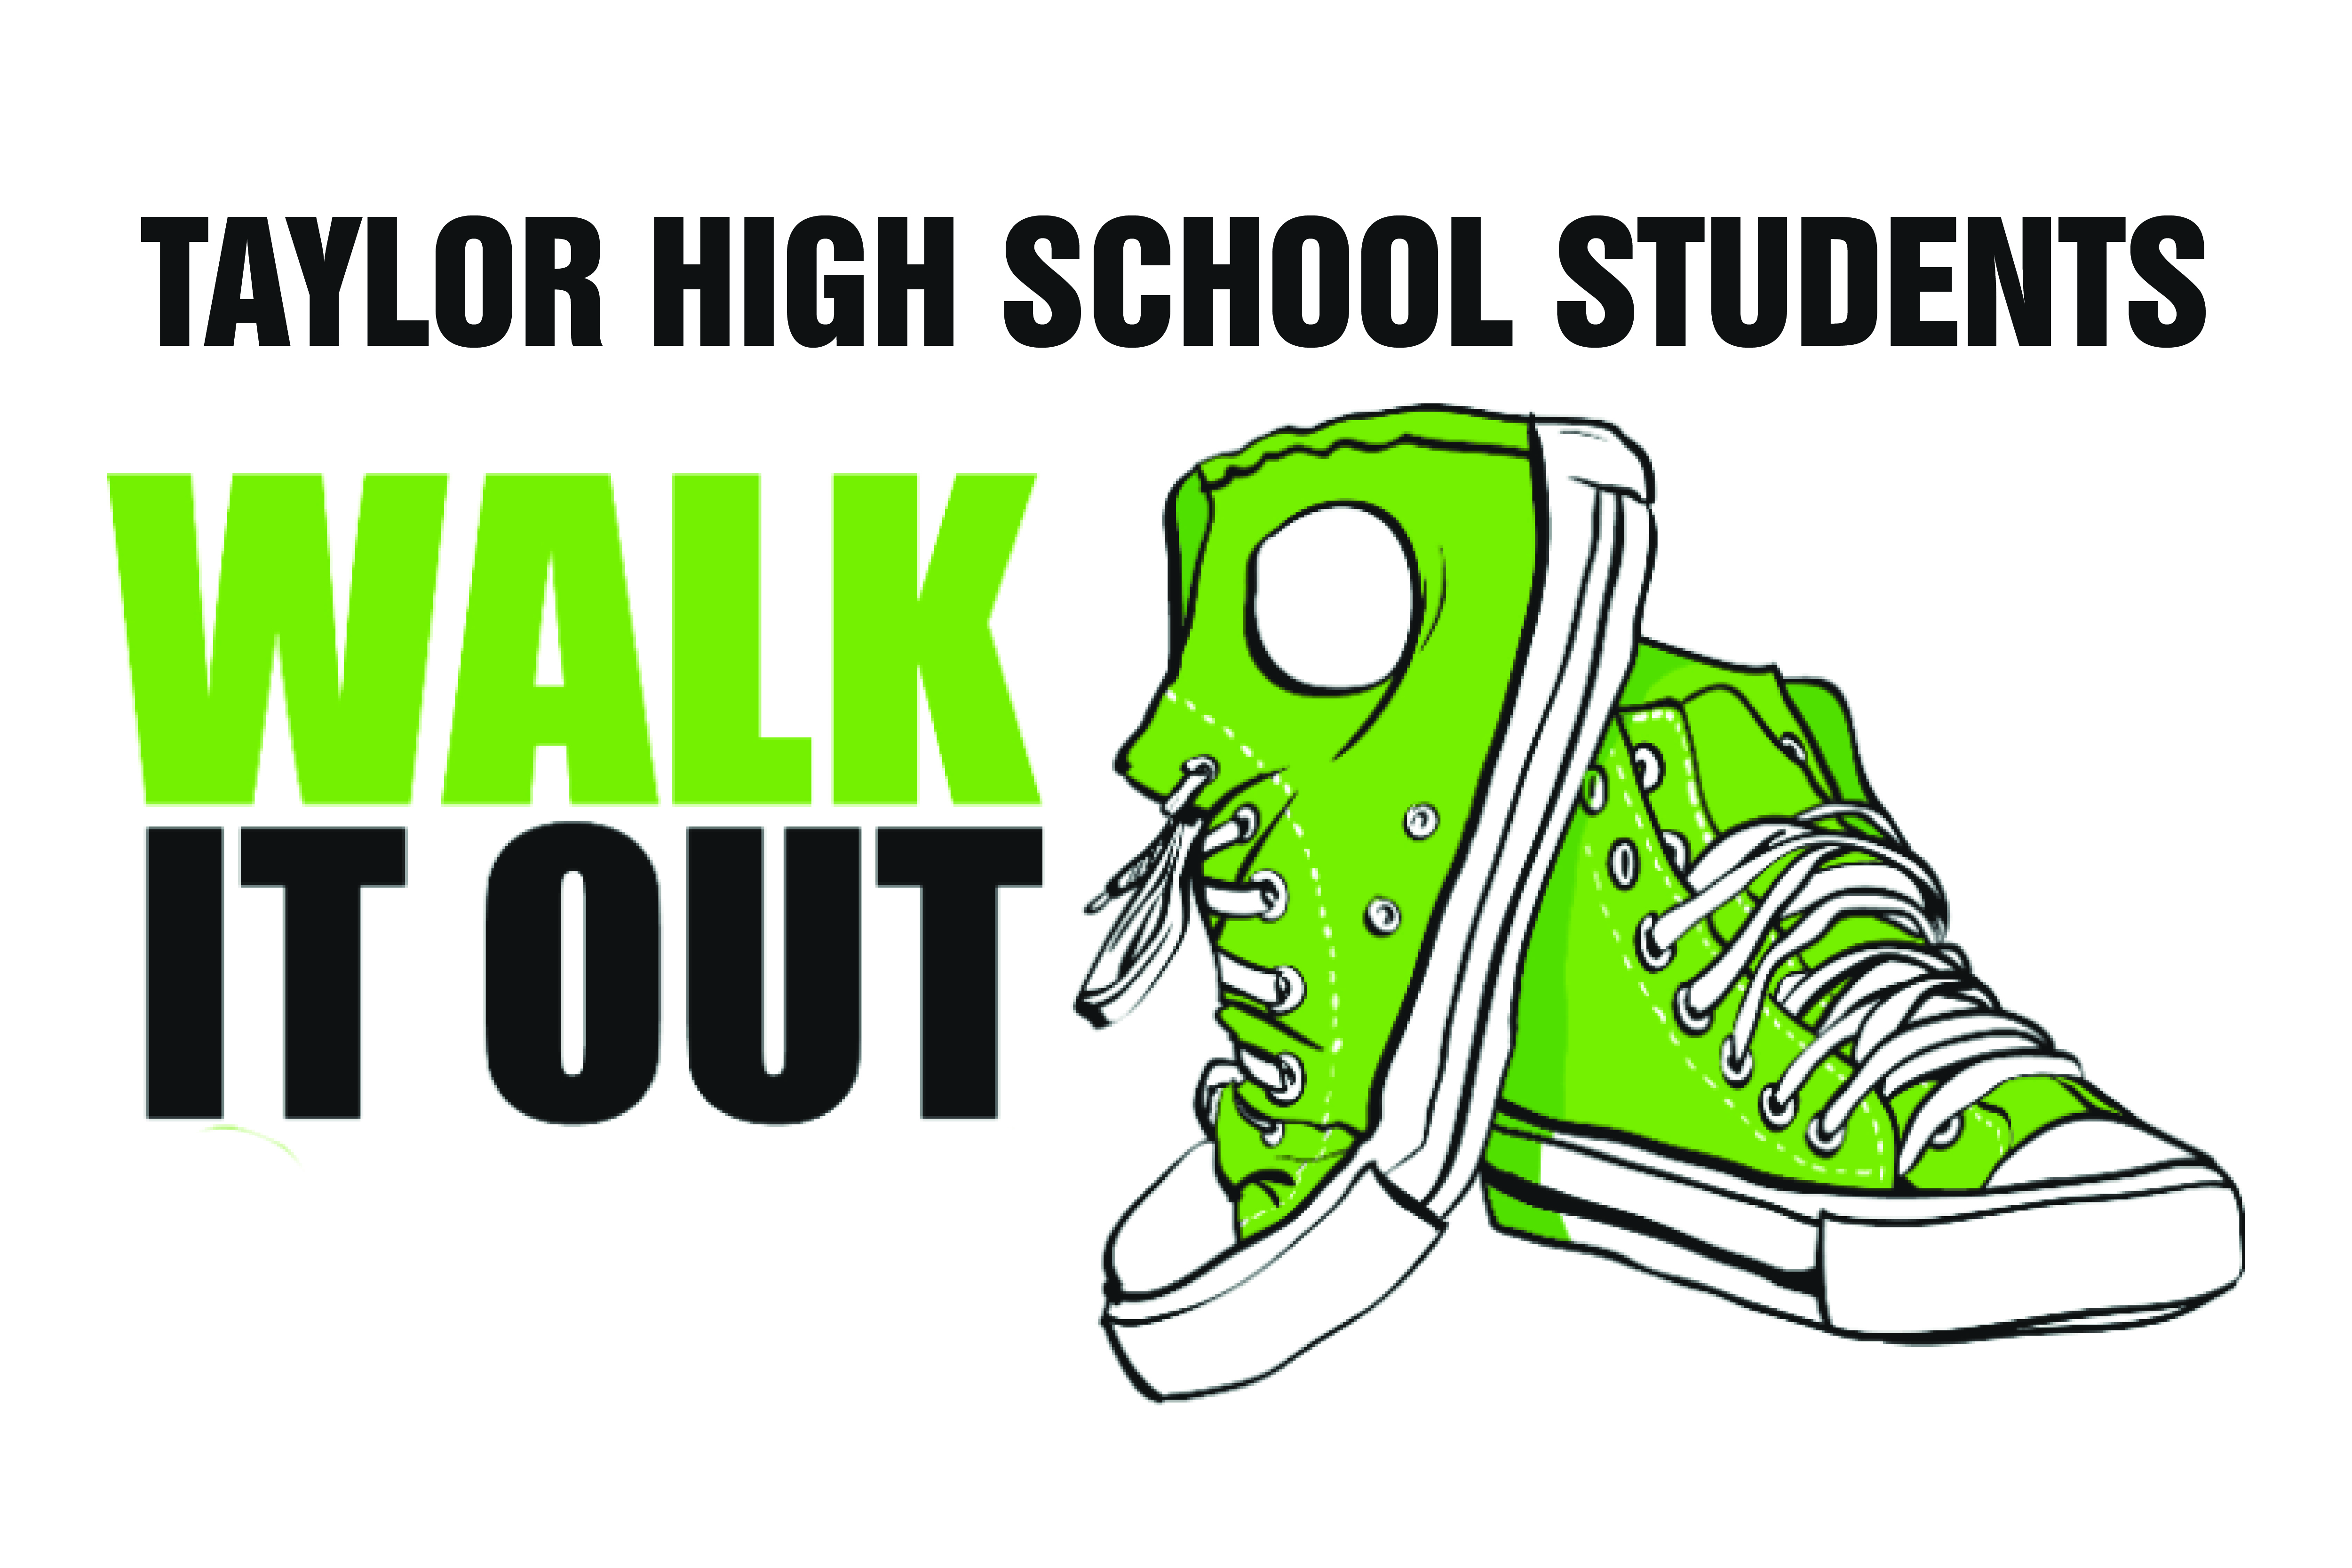 Taylor High School Student Dare - May 8-12